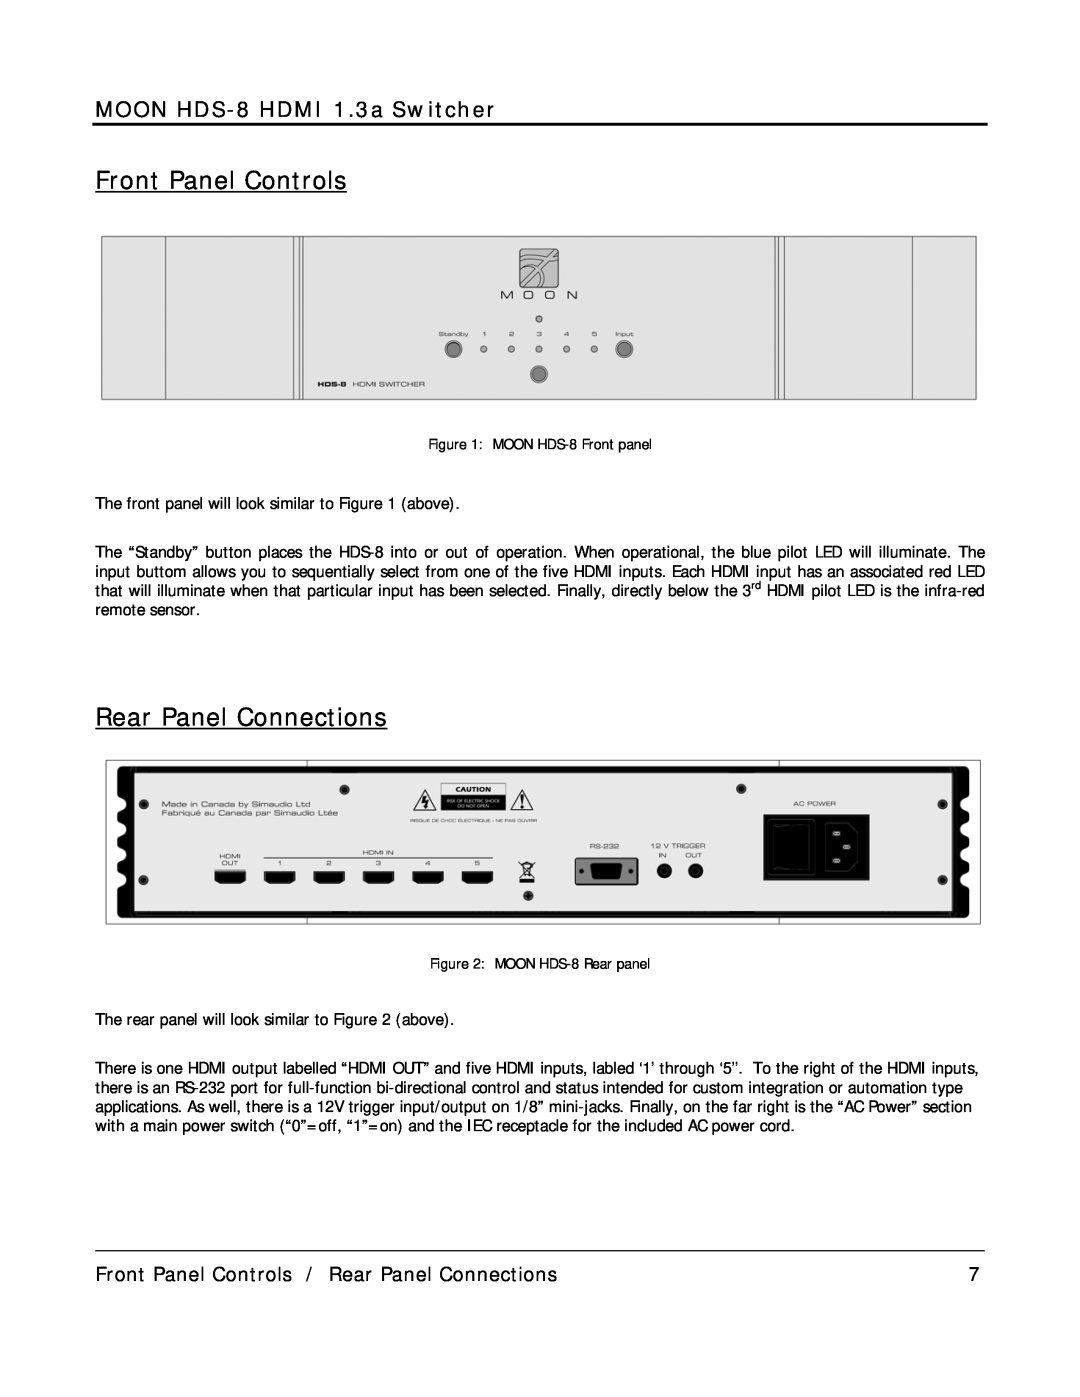 Simaudio owner manual Front Panel Controls, Rear Panel Connections, MOON HDS-8 HDMI 1.3a Switcher 